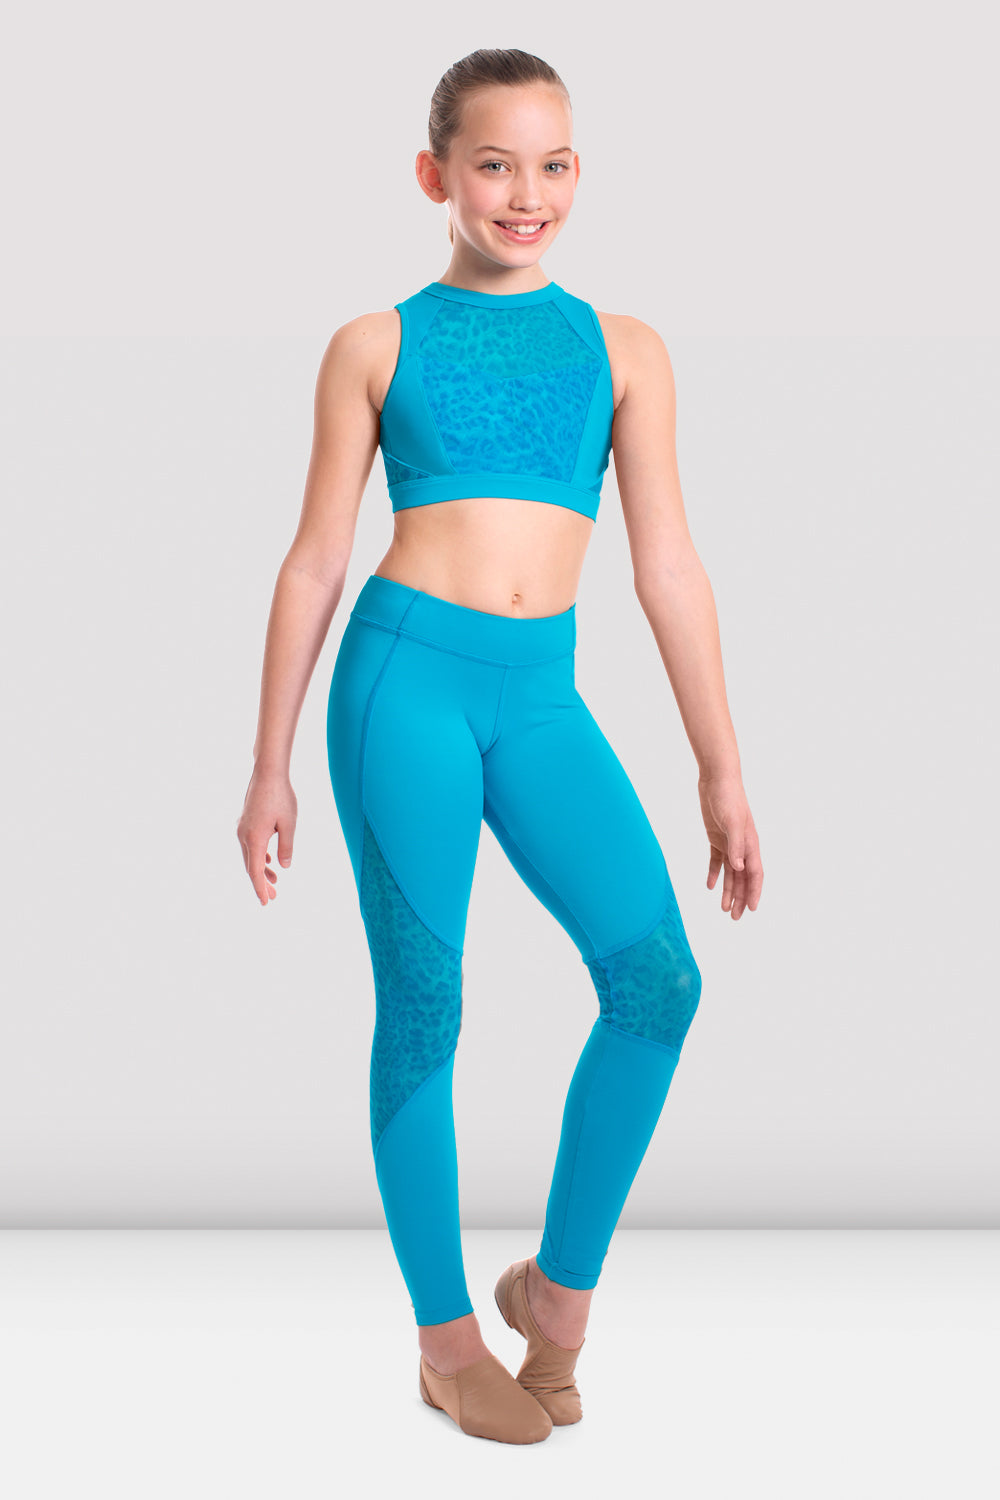 Shop Slim Fit Leggings with Contrast Panel Insert and V-shape